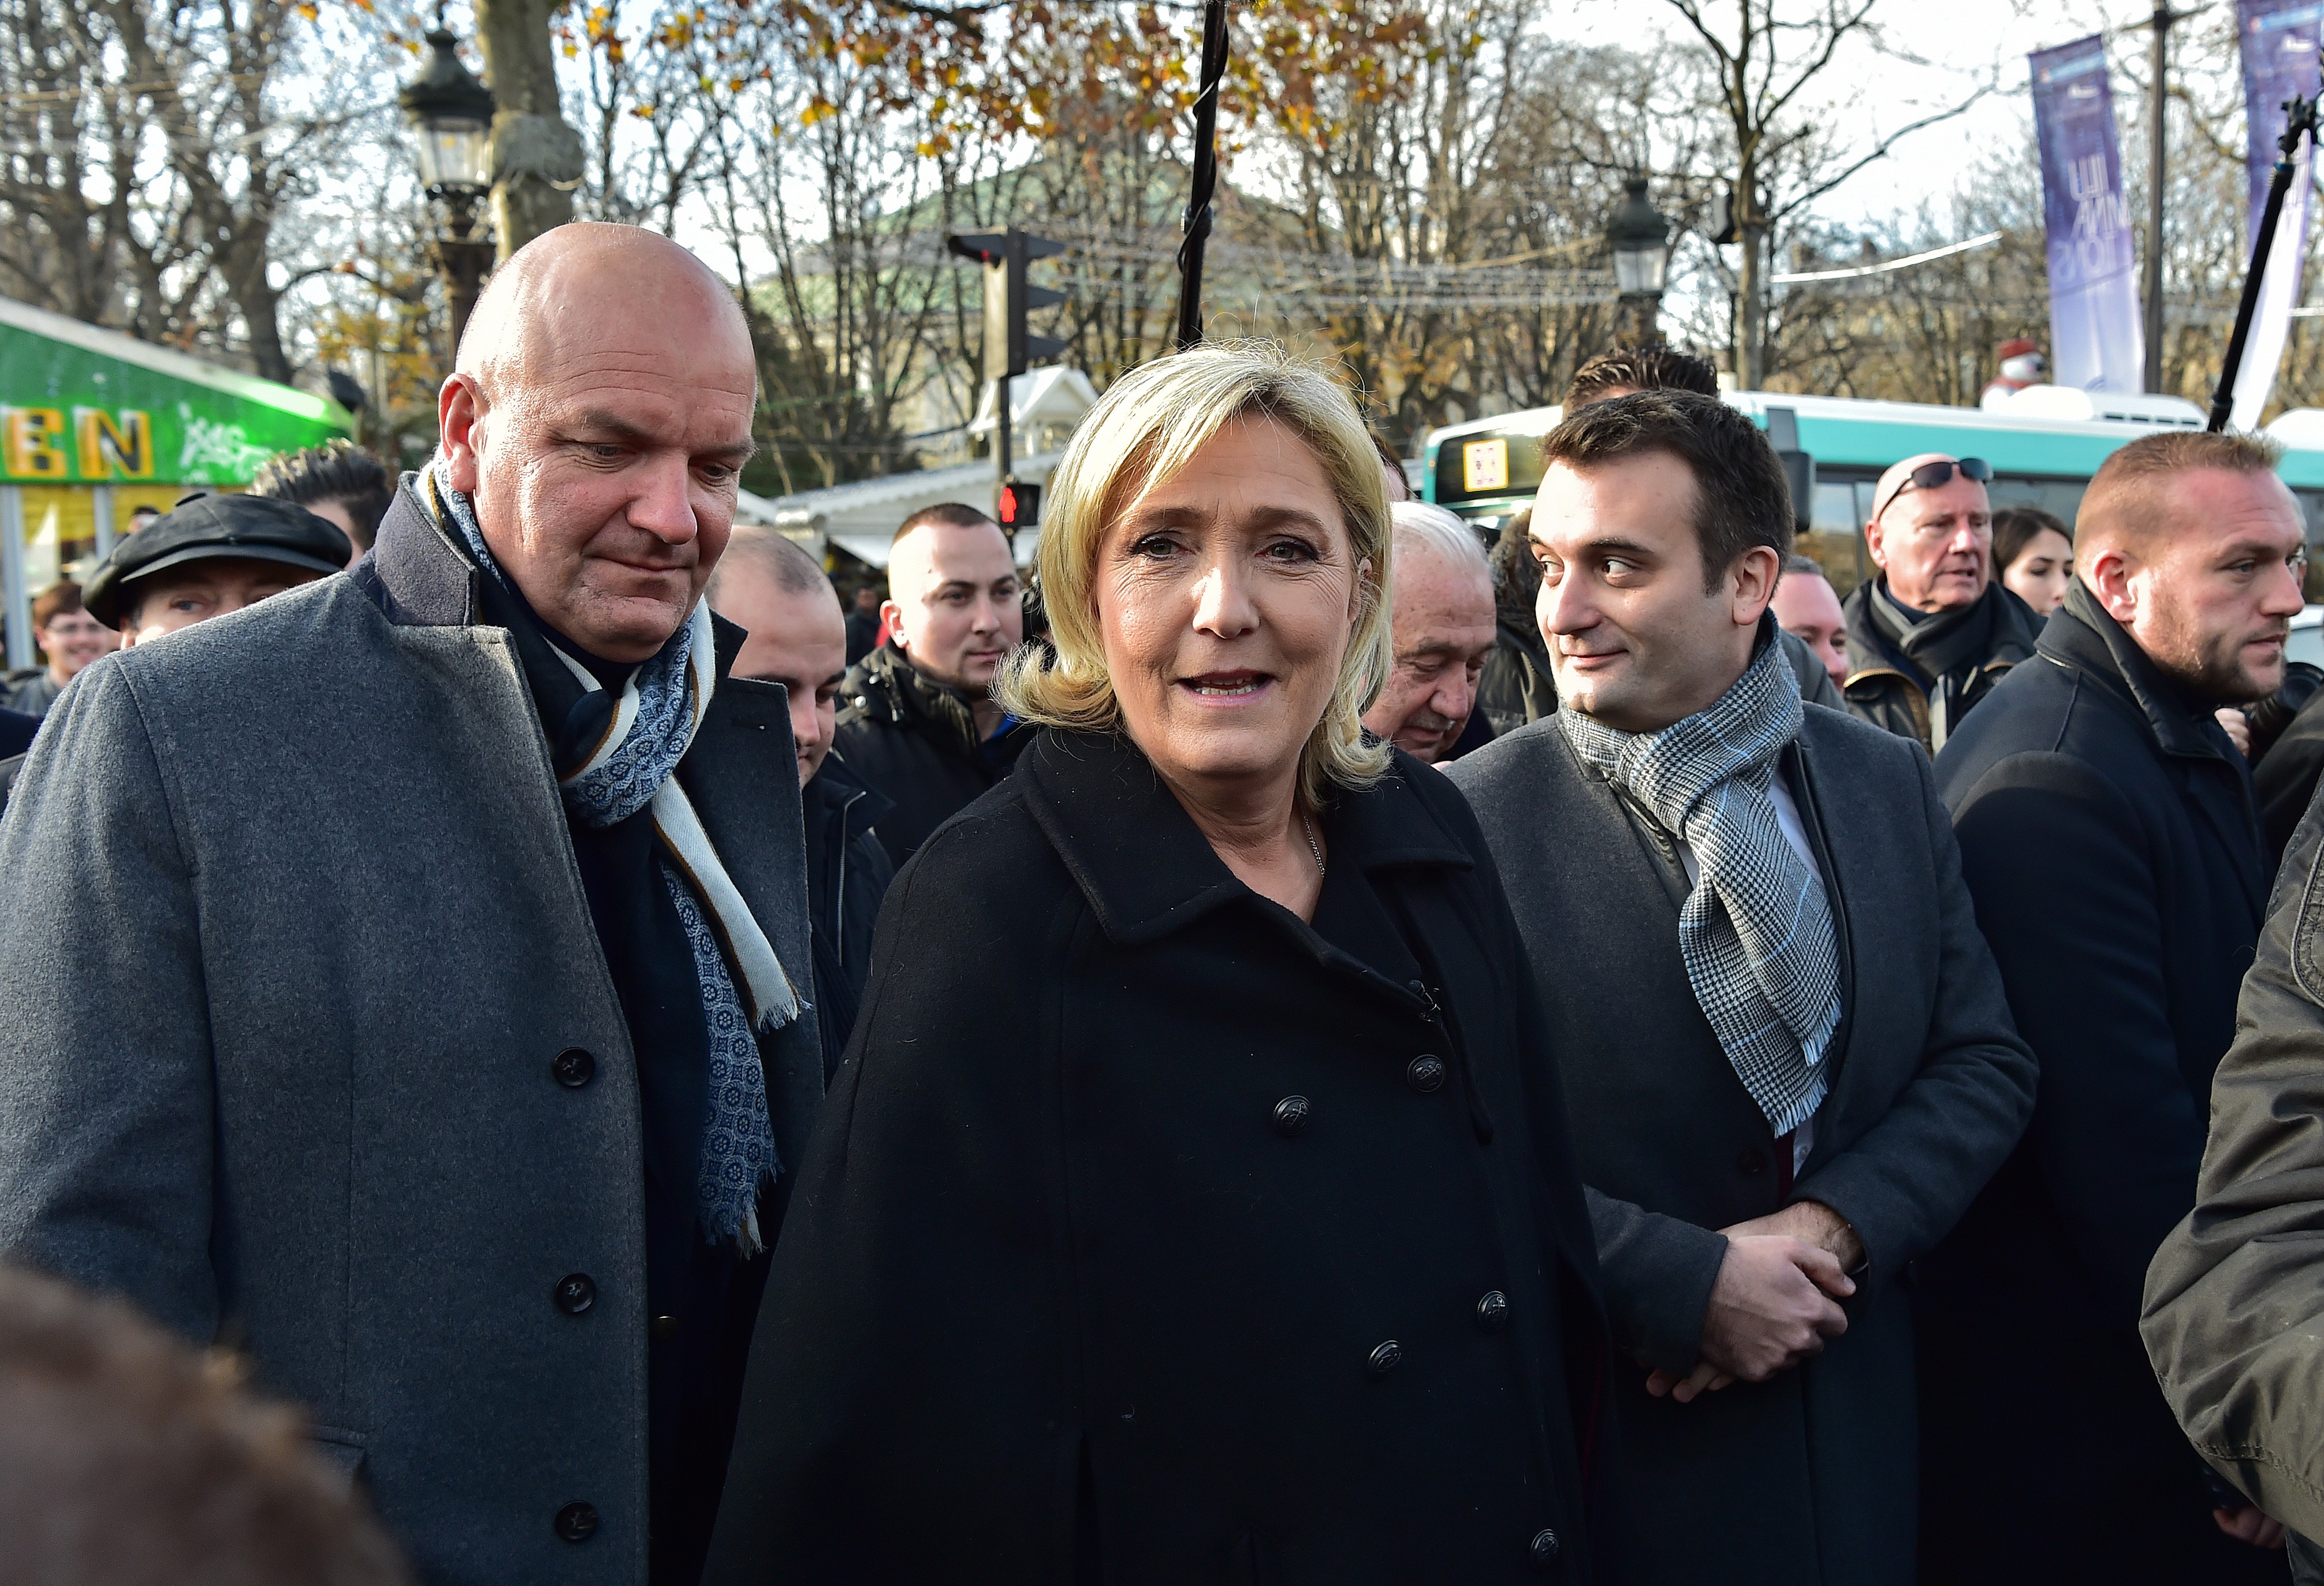 French far-right Front National (FN) party president, member of European Parliament and candidate for France's 2017 presidential election, Marine Le Pen (C) walks along with FN vice-president Florian Philippot (R) during a visit of a Christmas market in Paris on December 8, 2016. (Christophe Archambault—AFP/Getty Images)